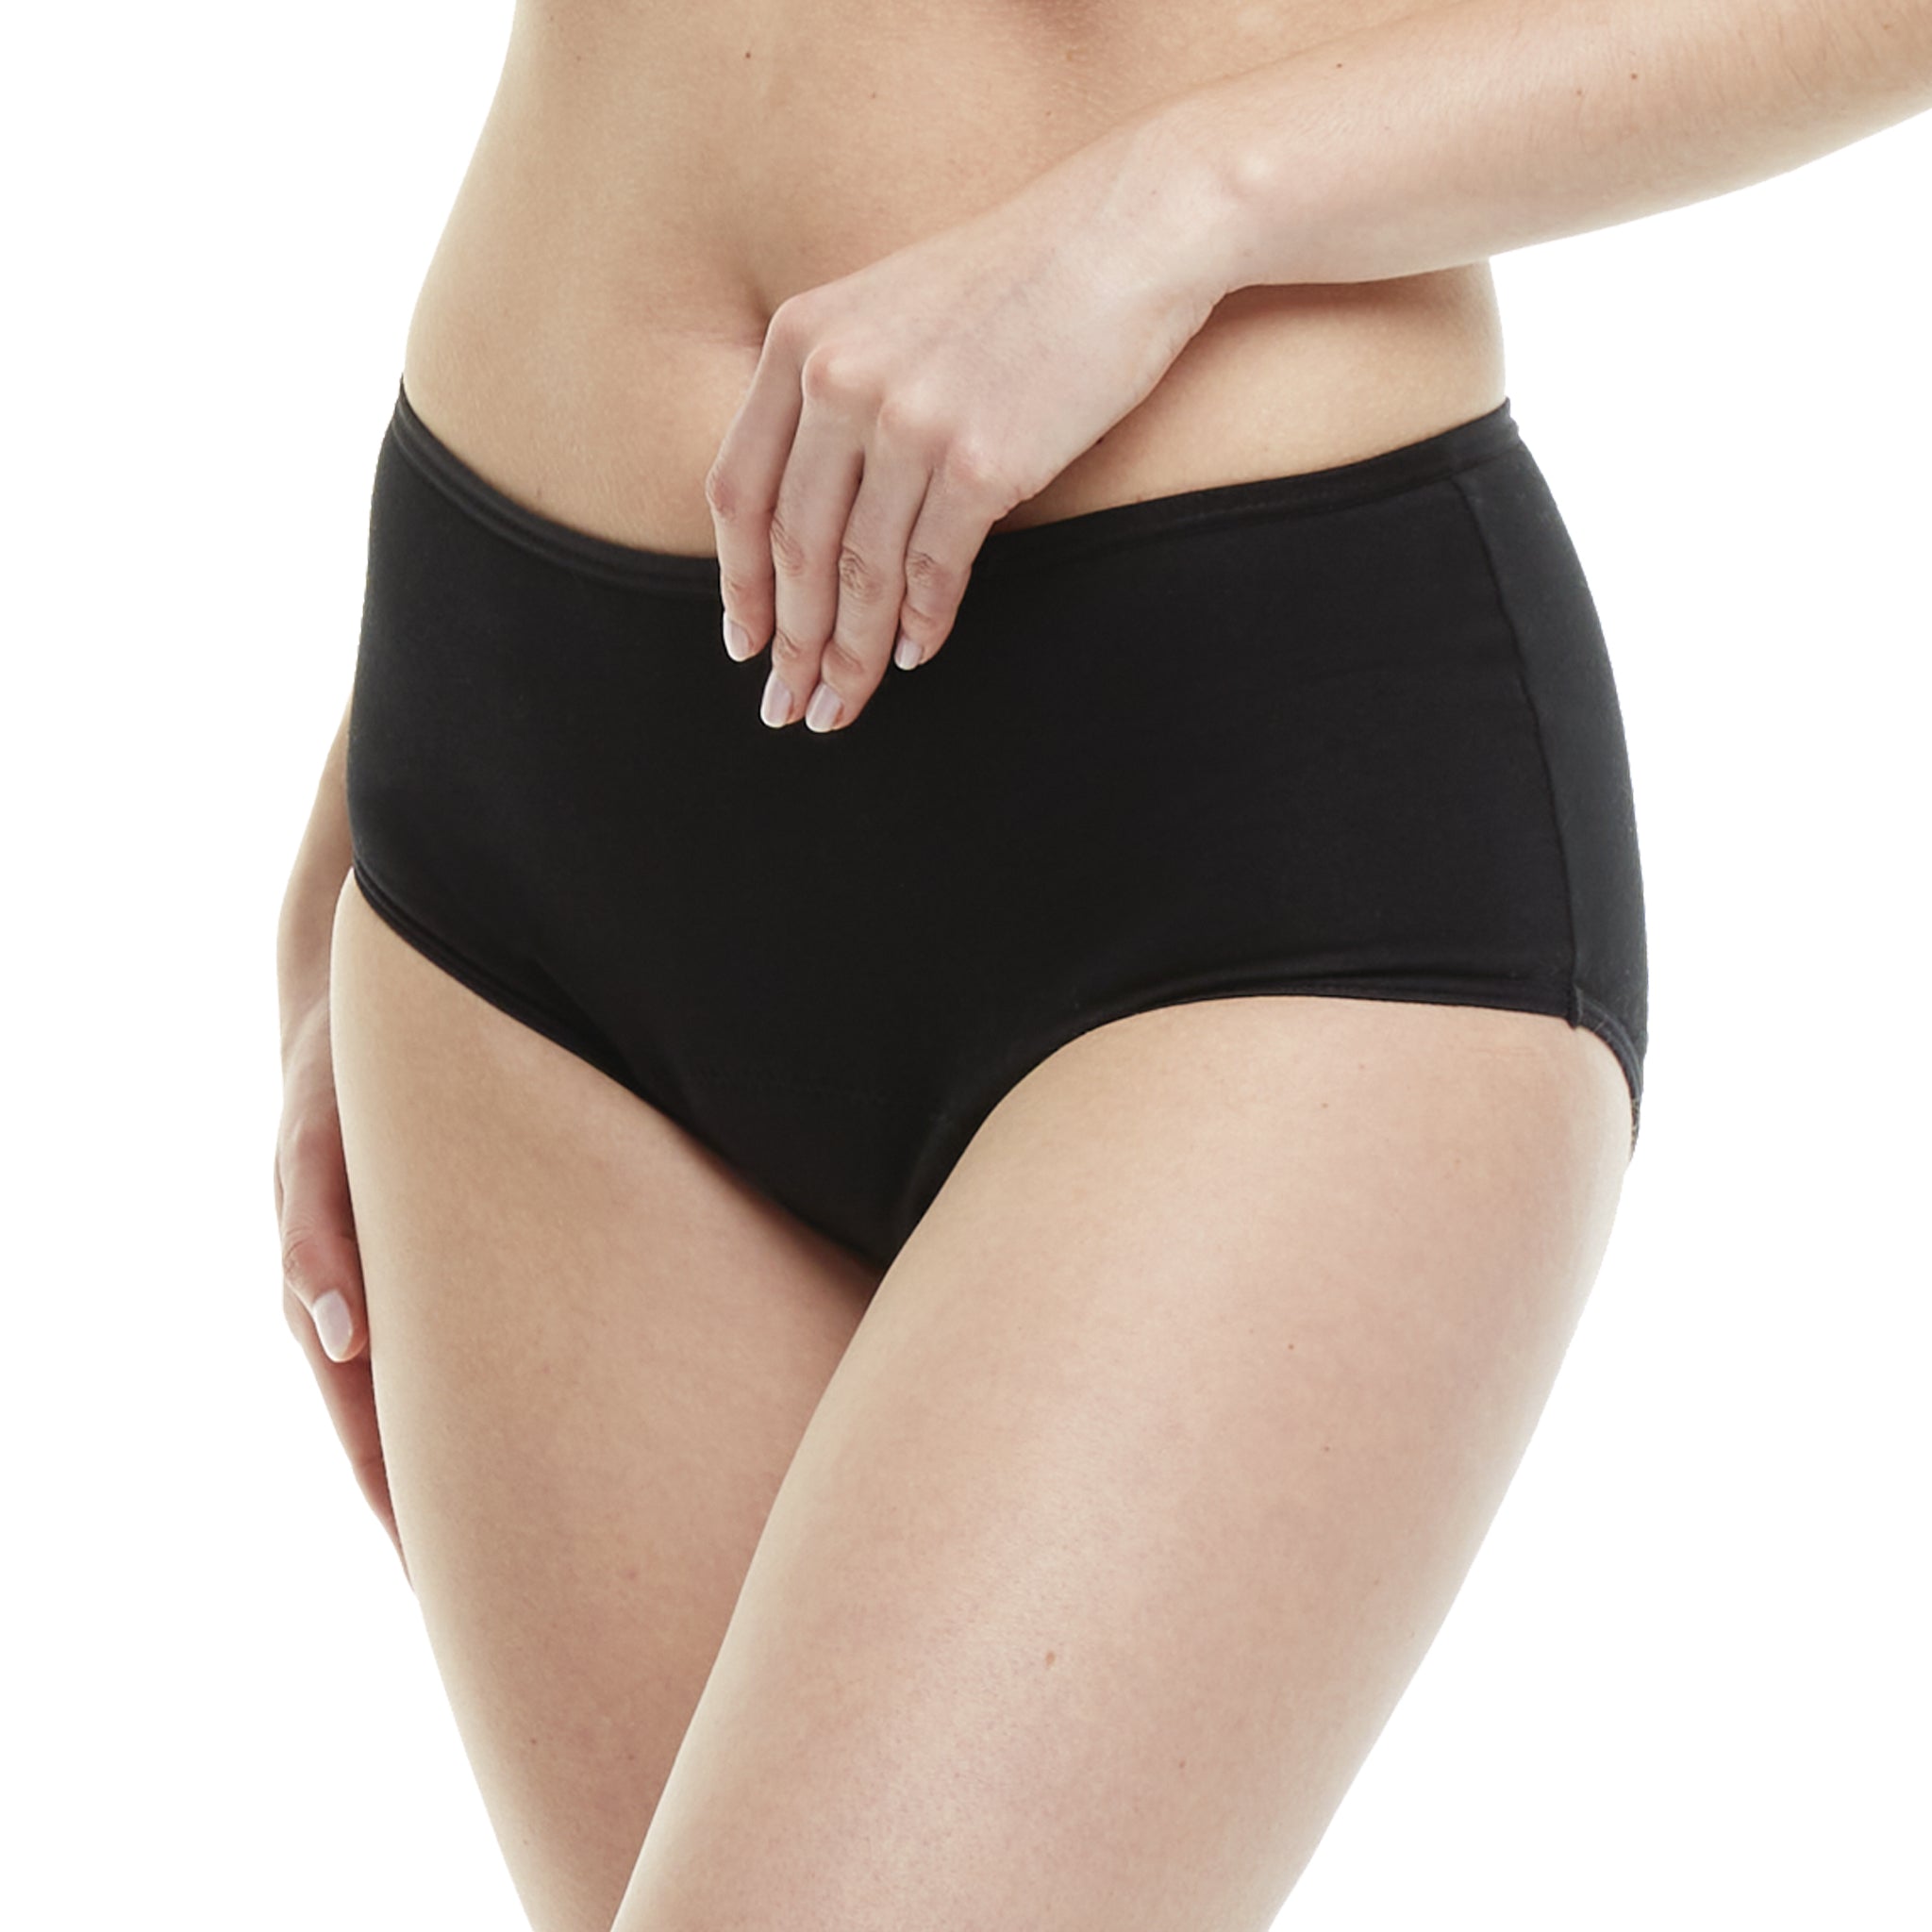 Can Period Panties Be Used for Incontinence?